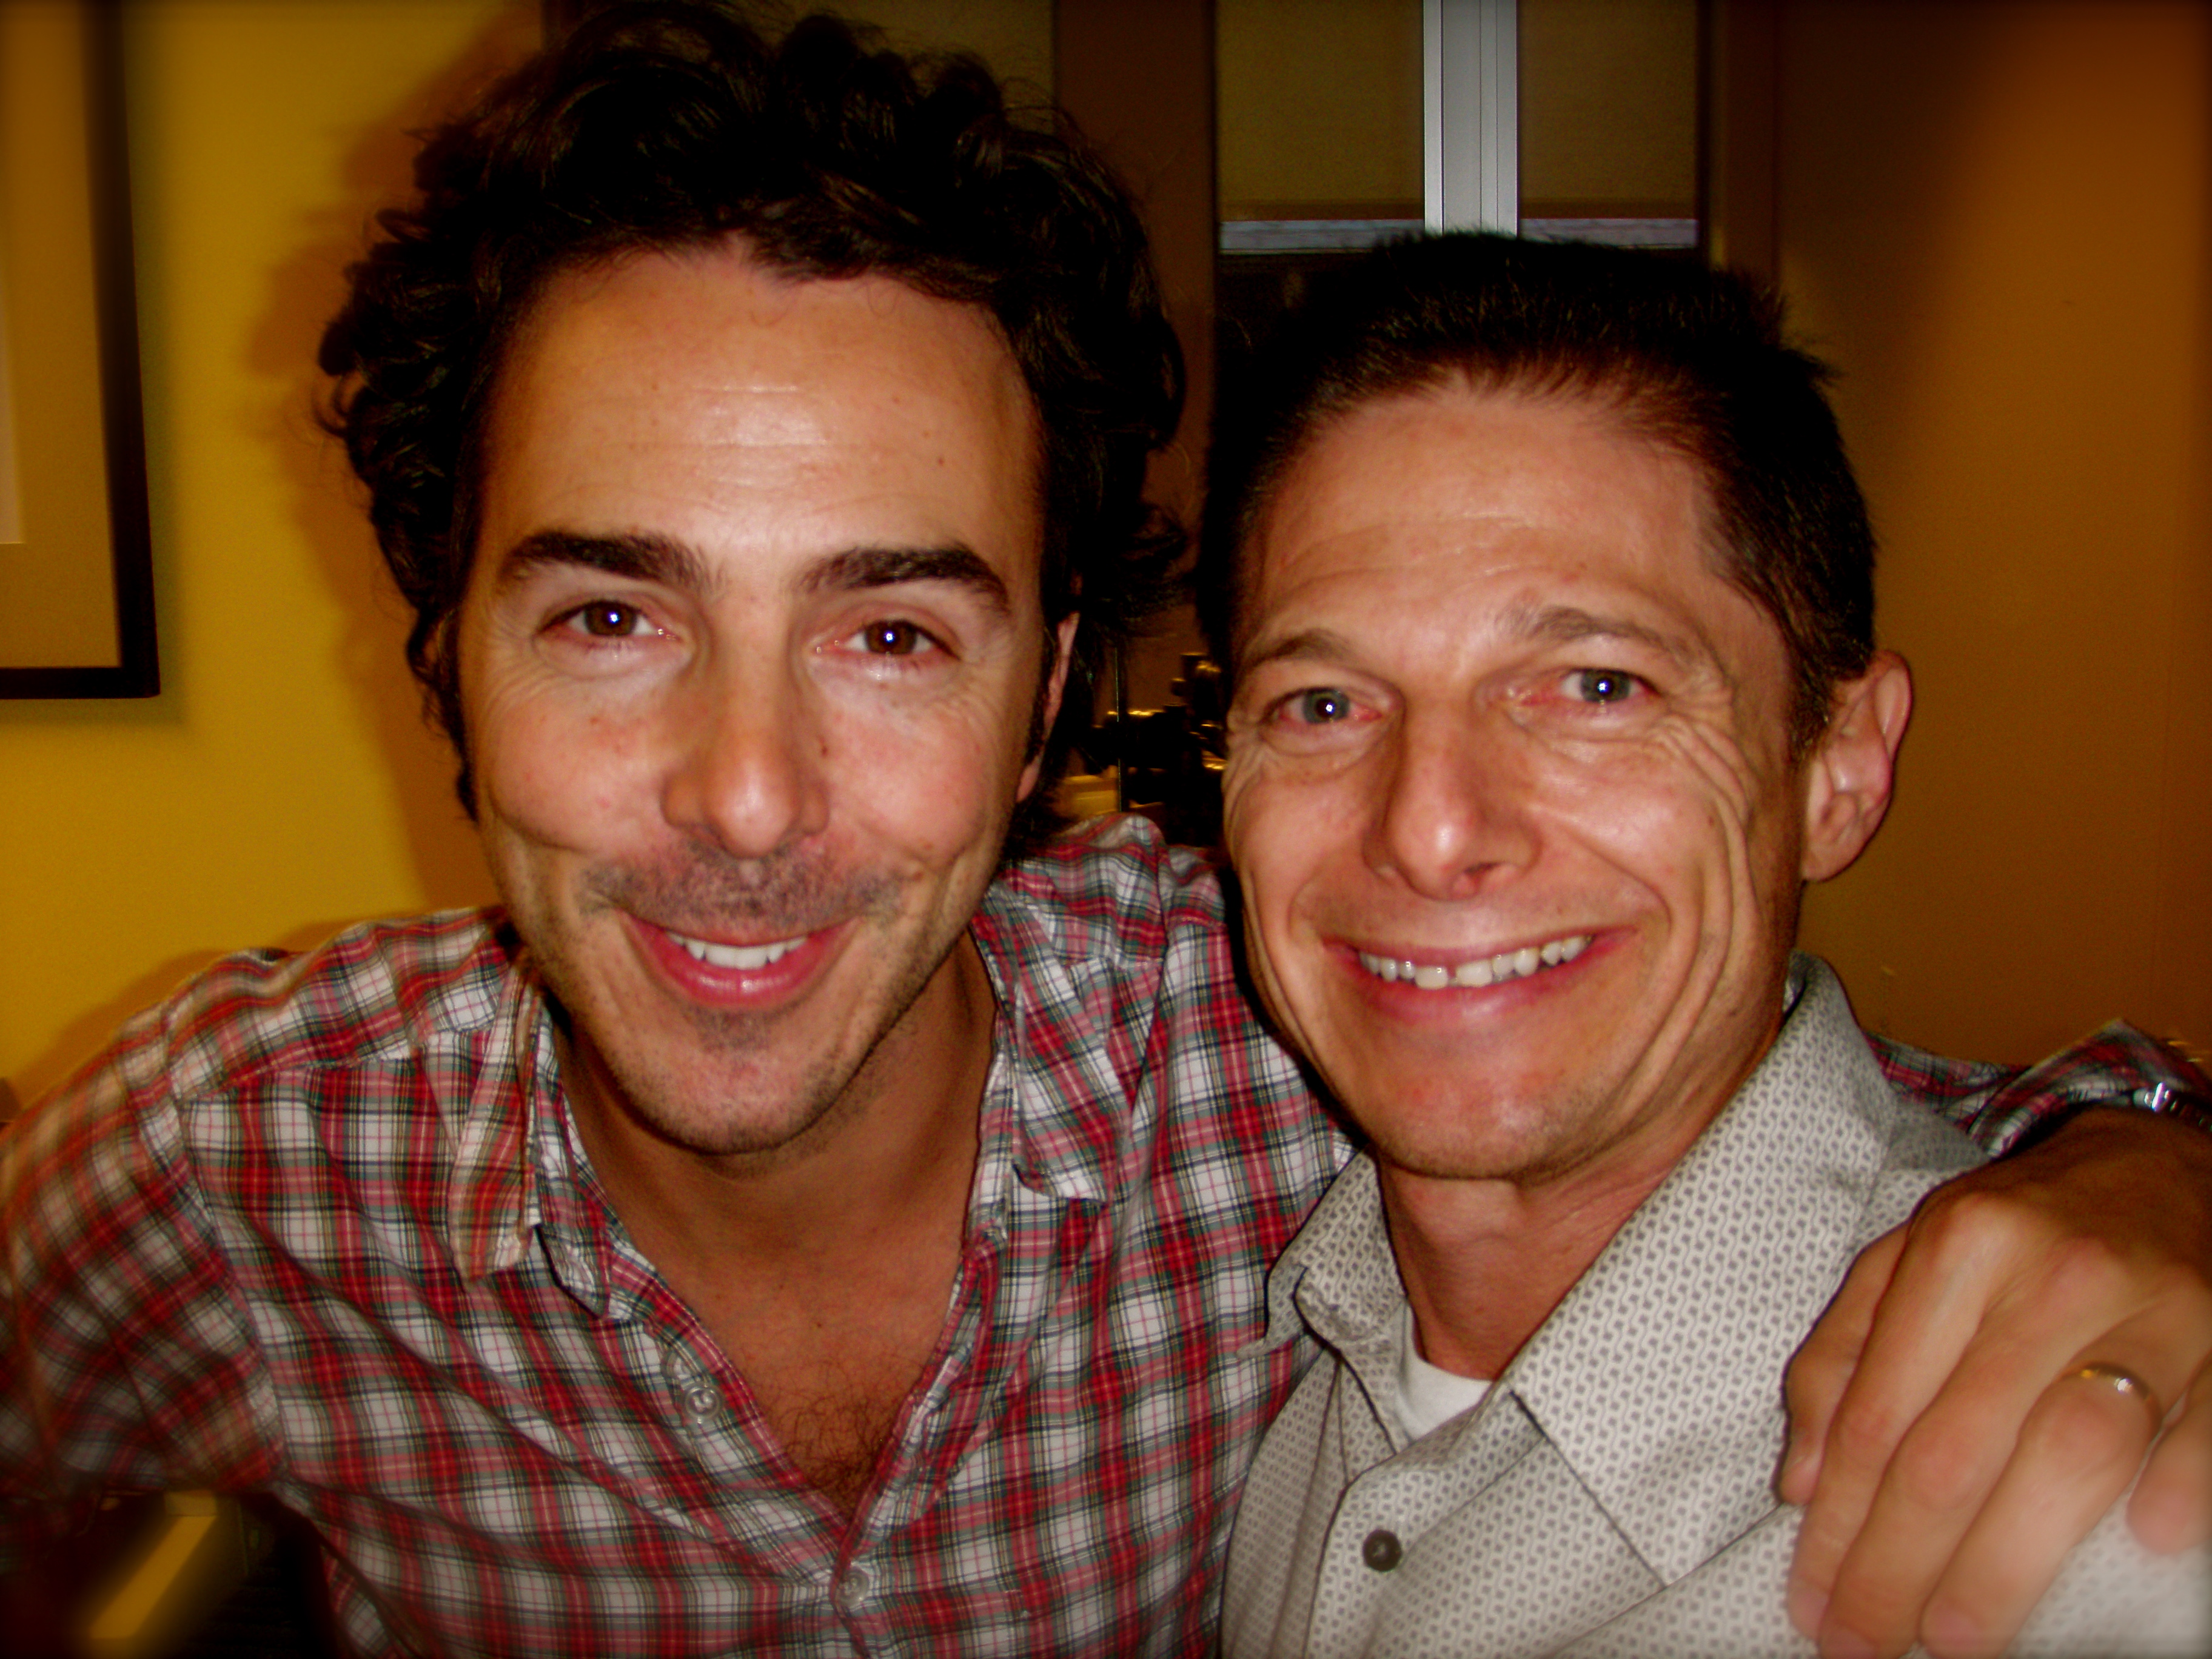 Shawn Levy and Todd on set of Date Night.